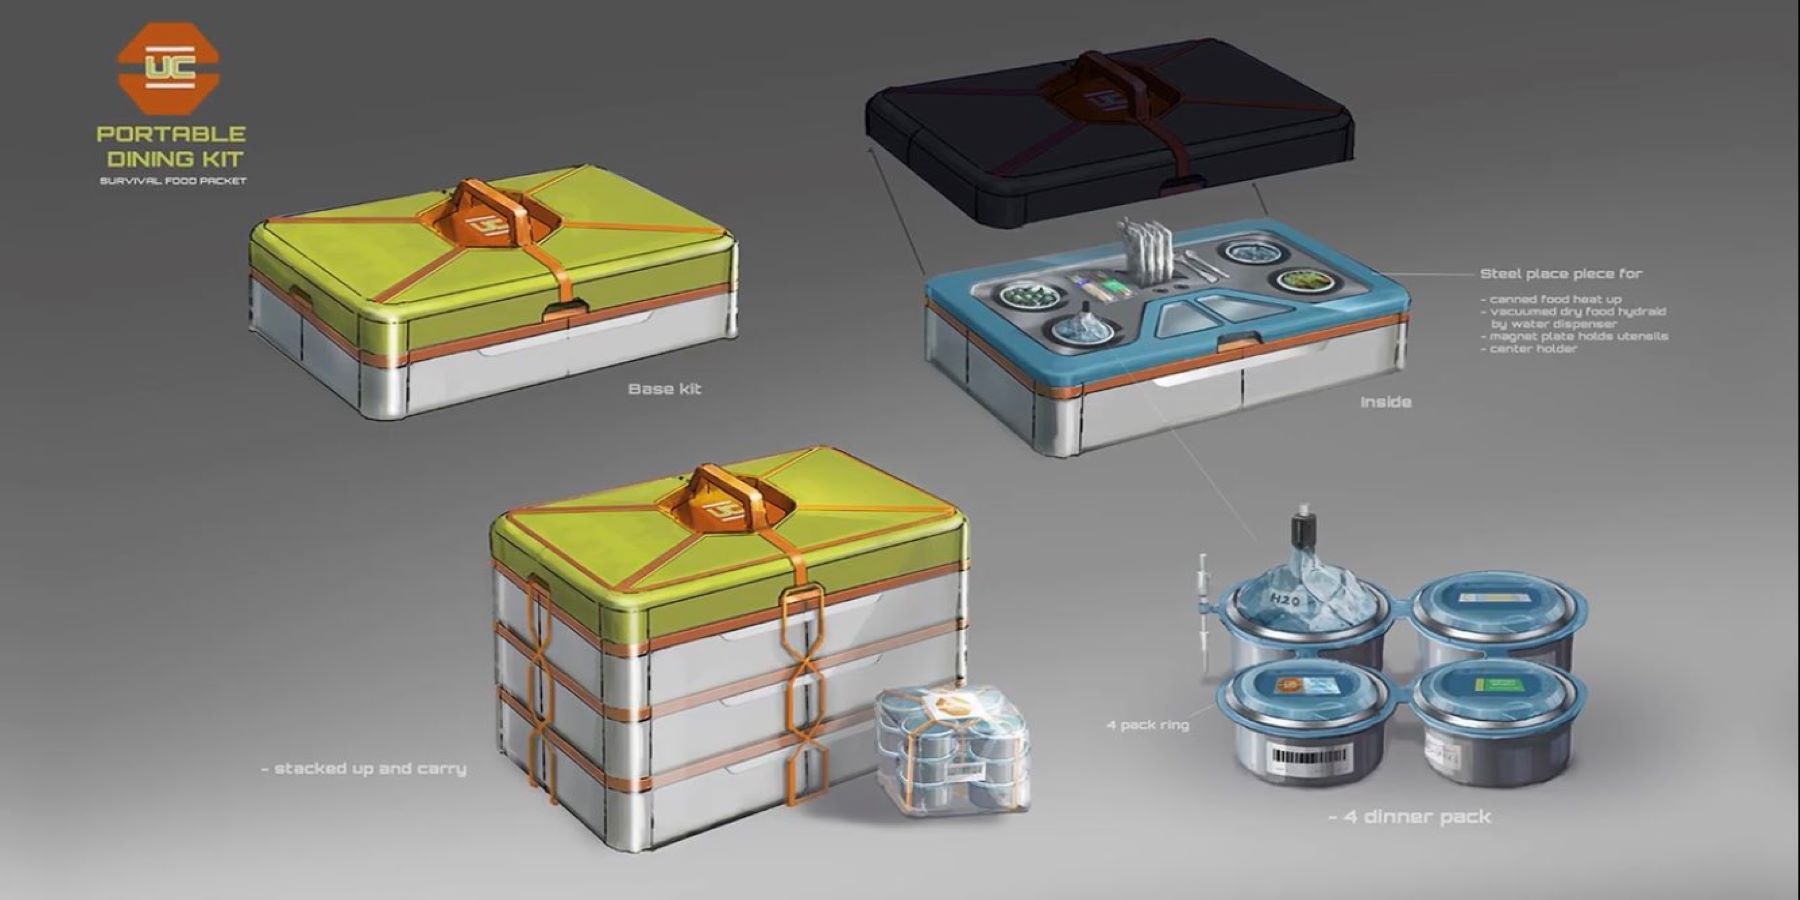 Concept art for Starfield displaying dining kits with water and food